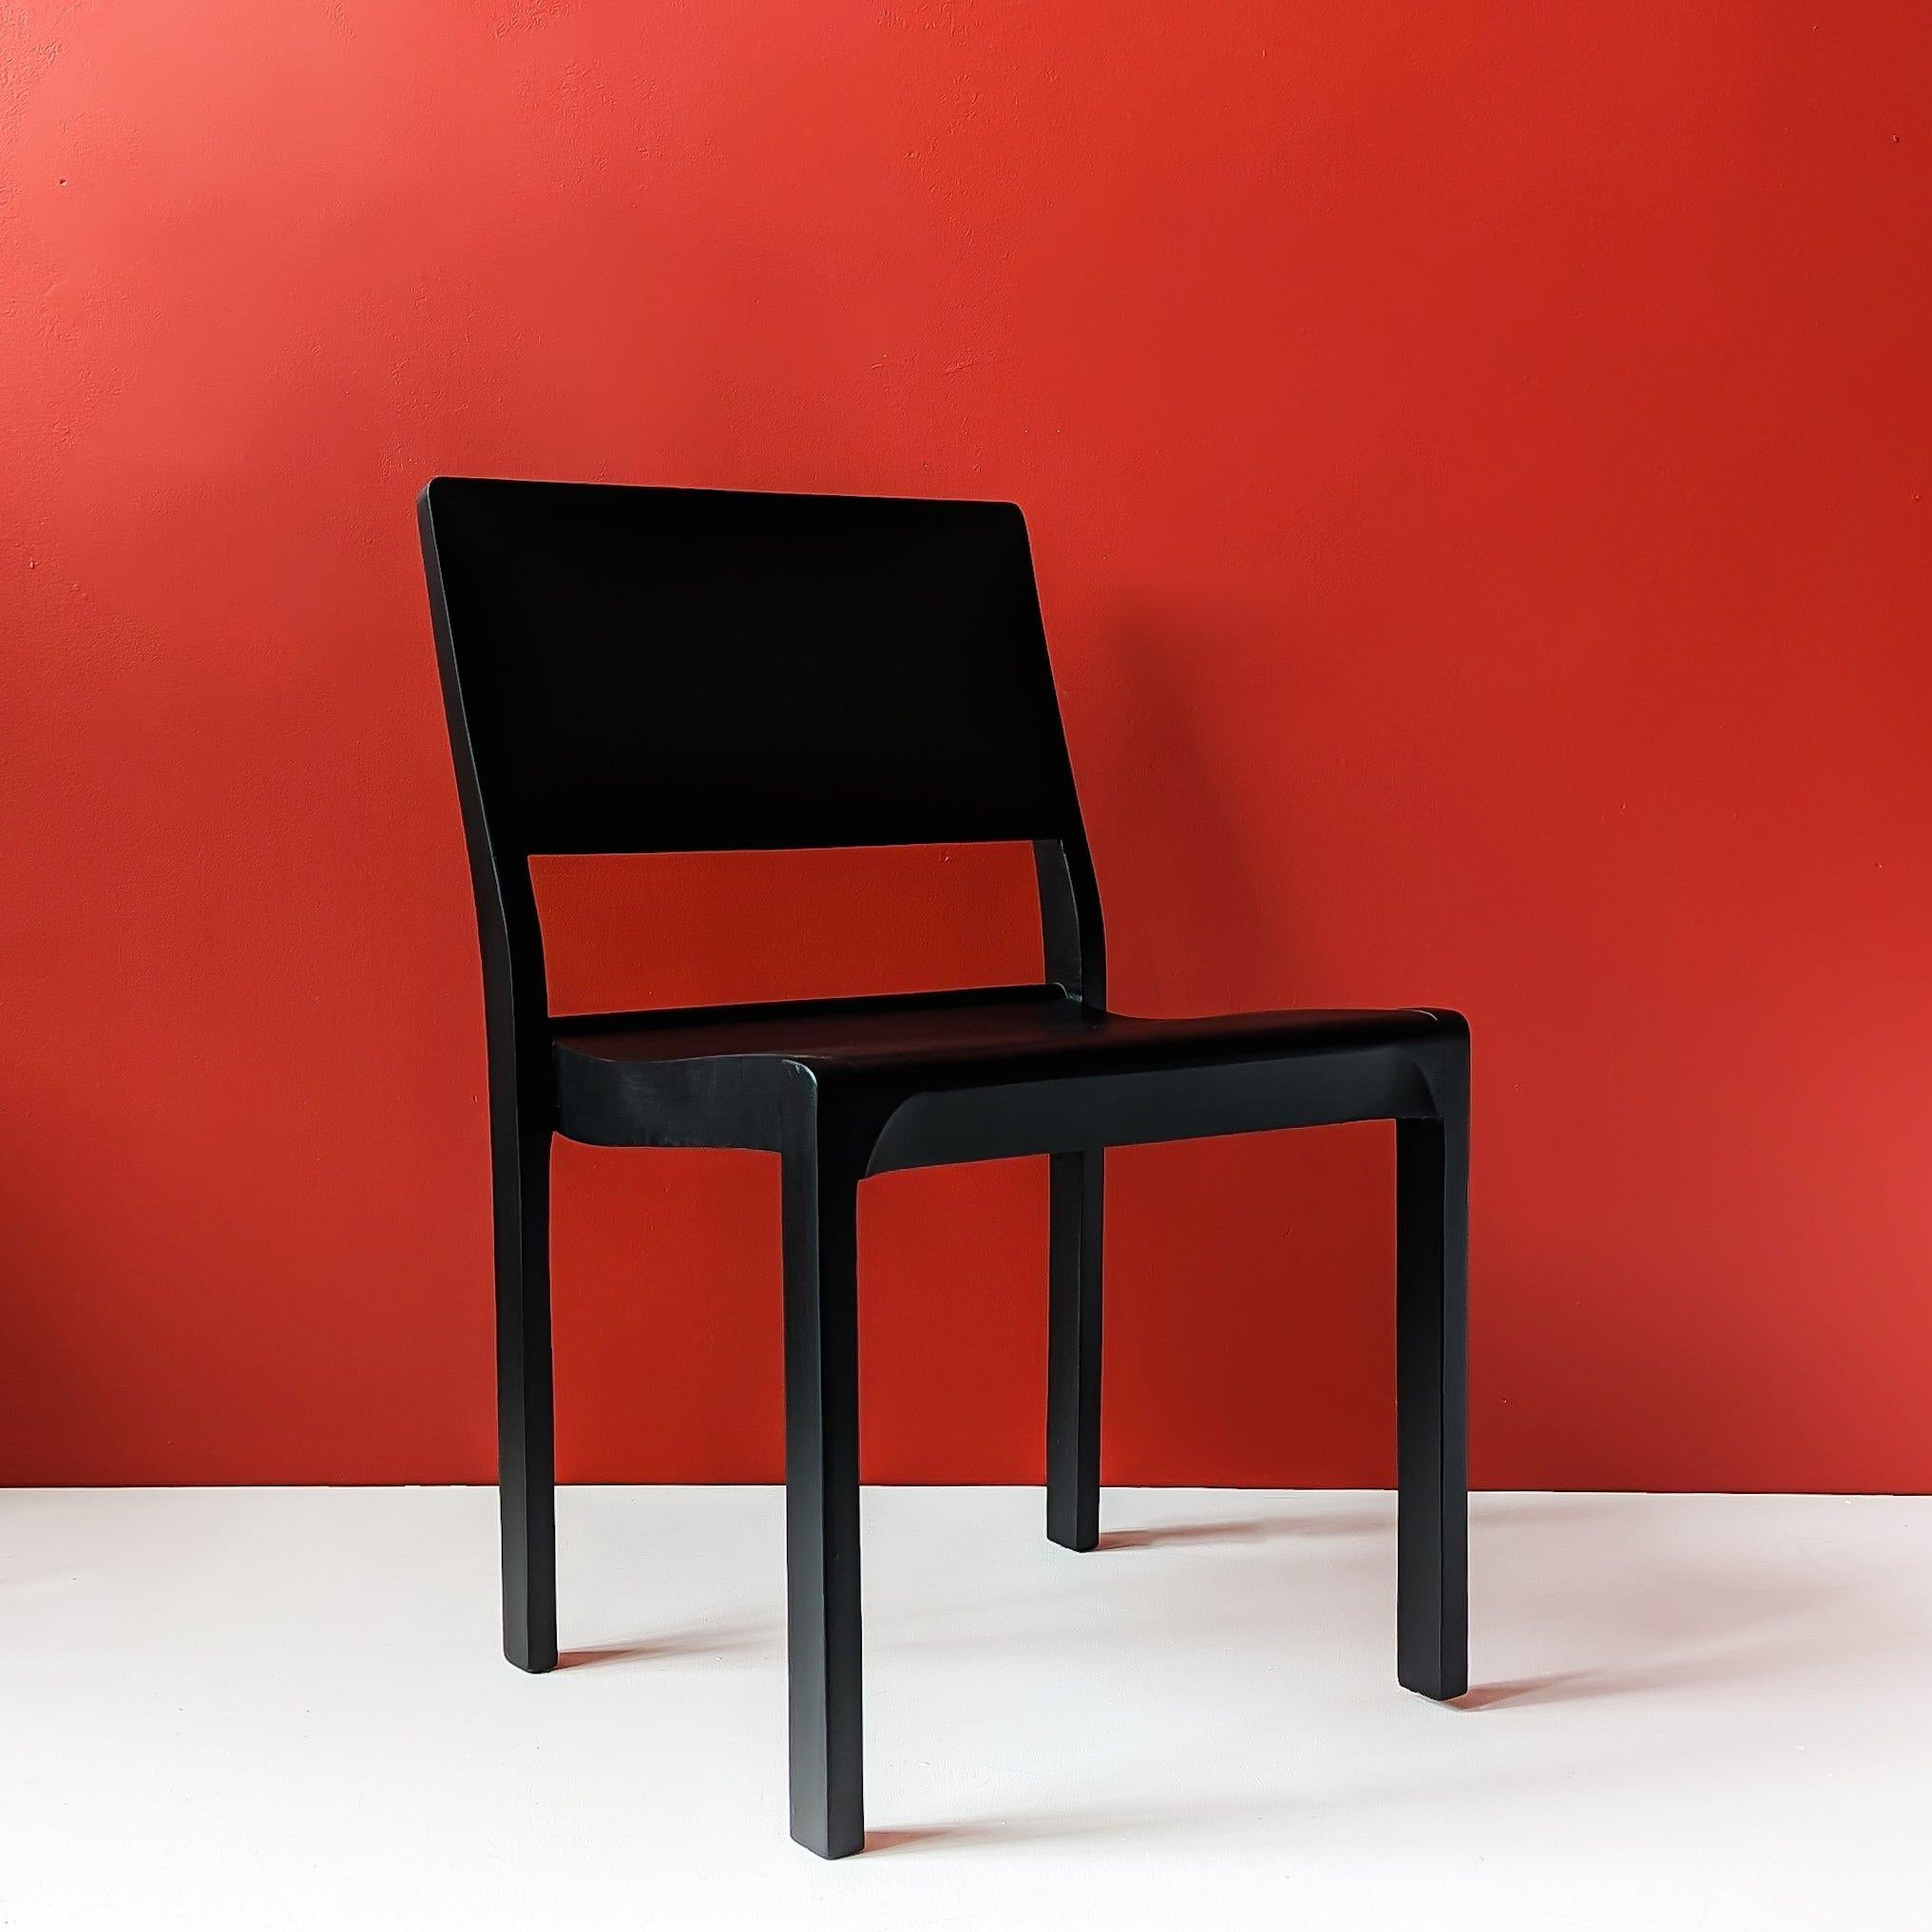 Chair 611 , designed by Alvar Aalto in 1929, is a stacking auditorium chair made of solid birch, also known as the 